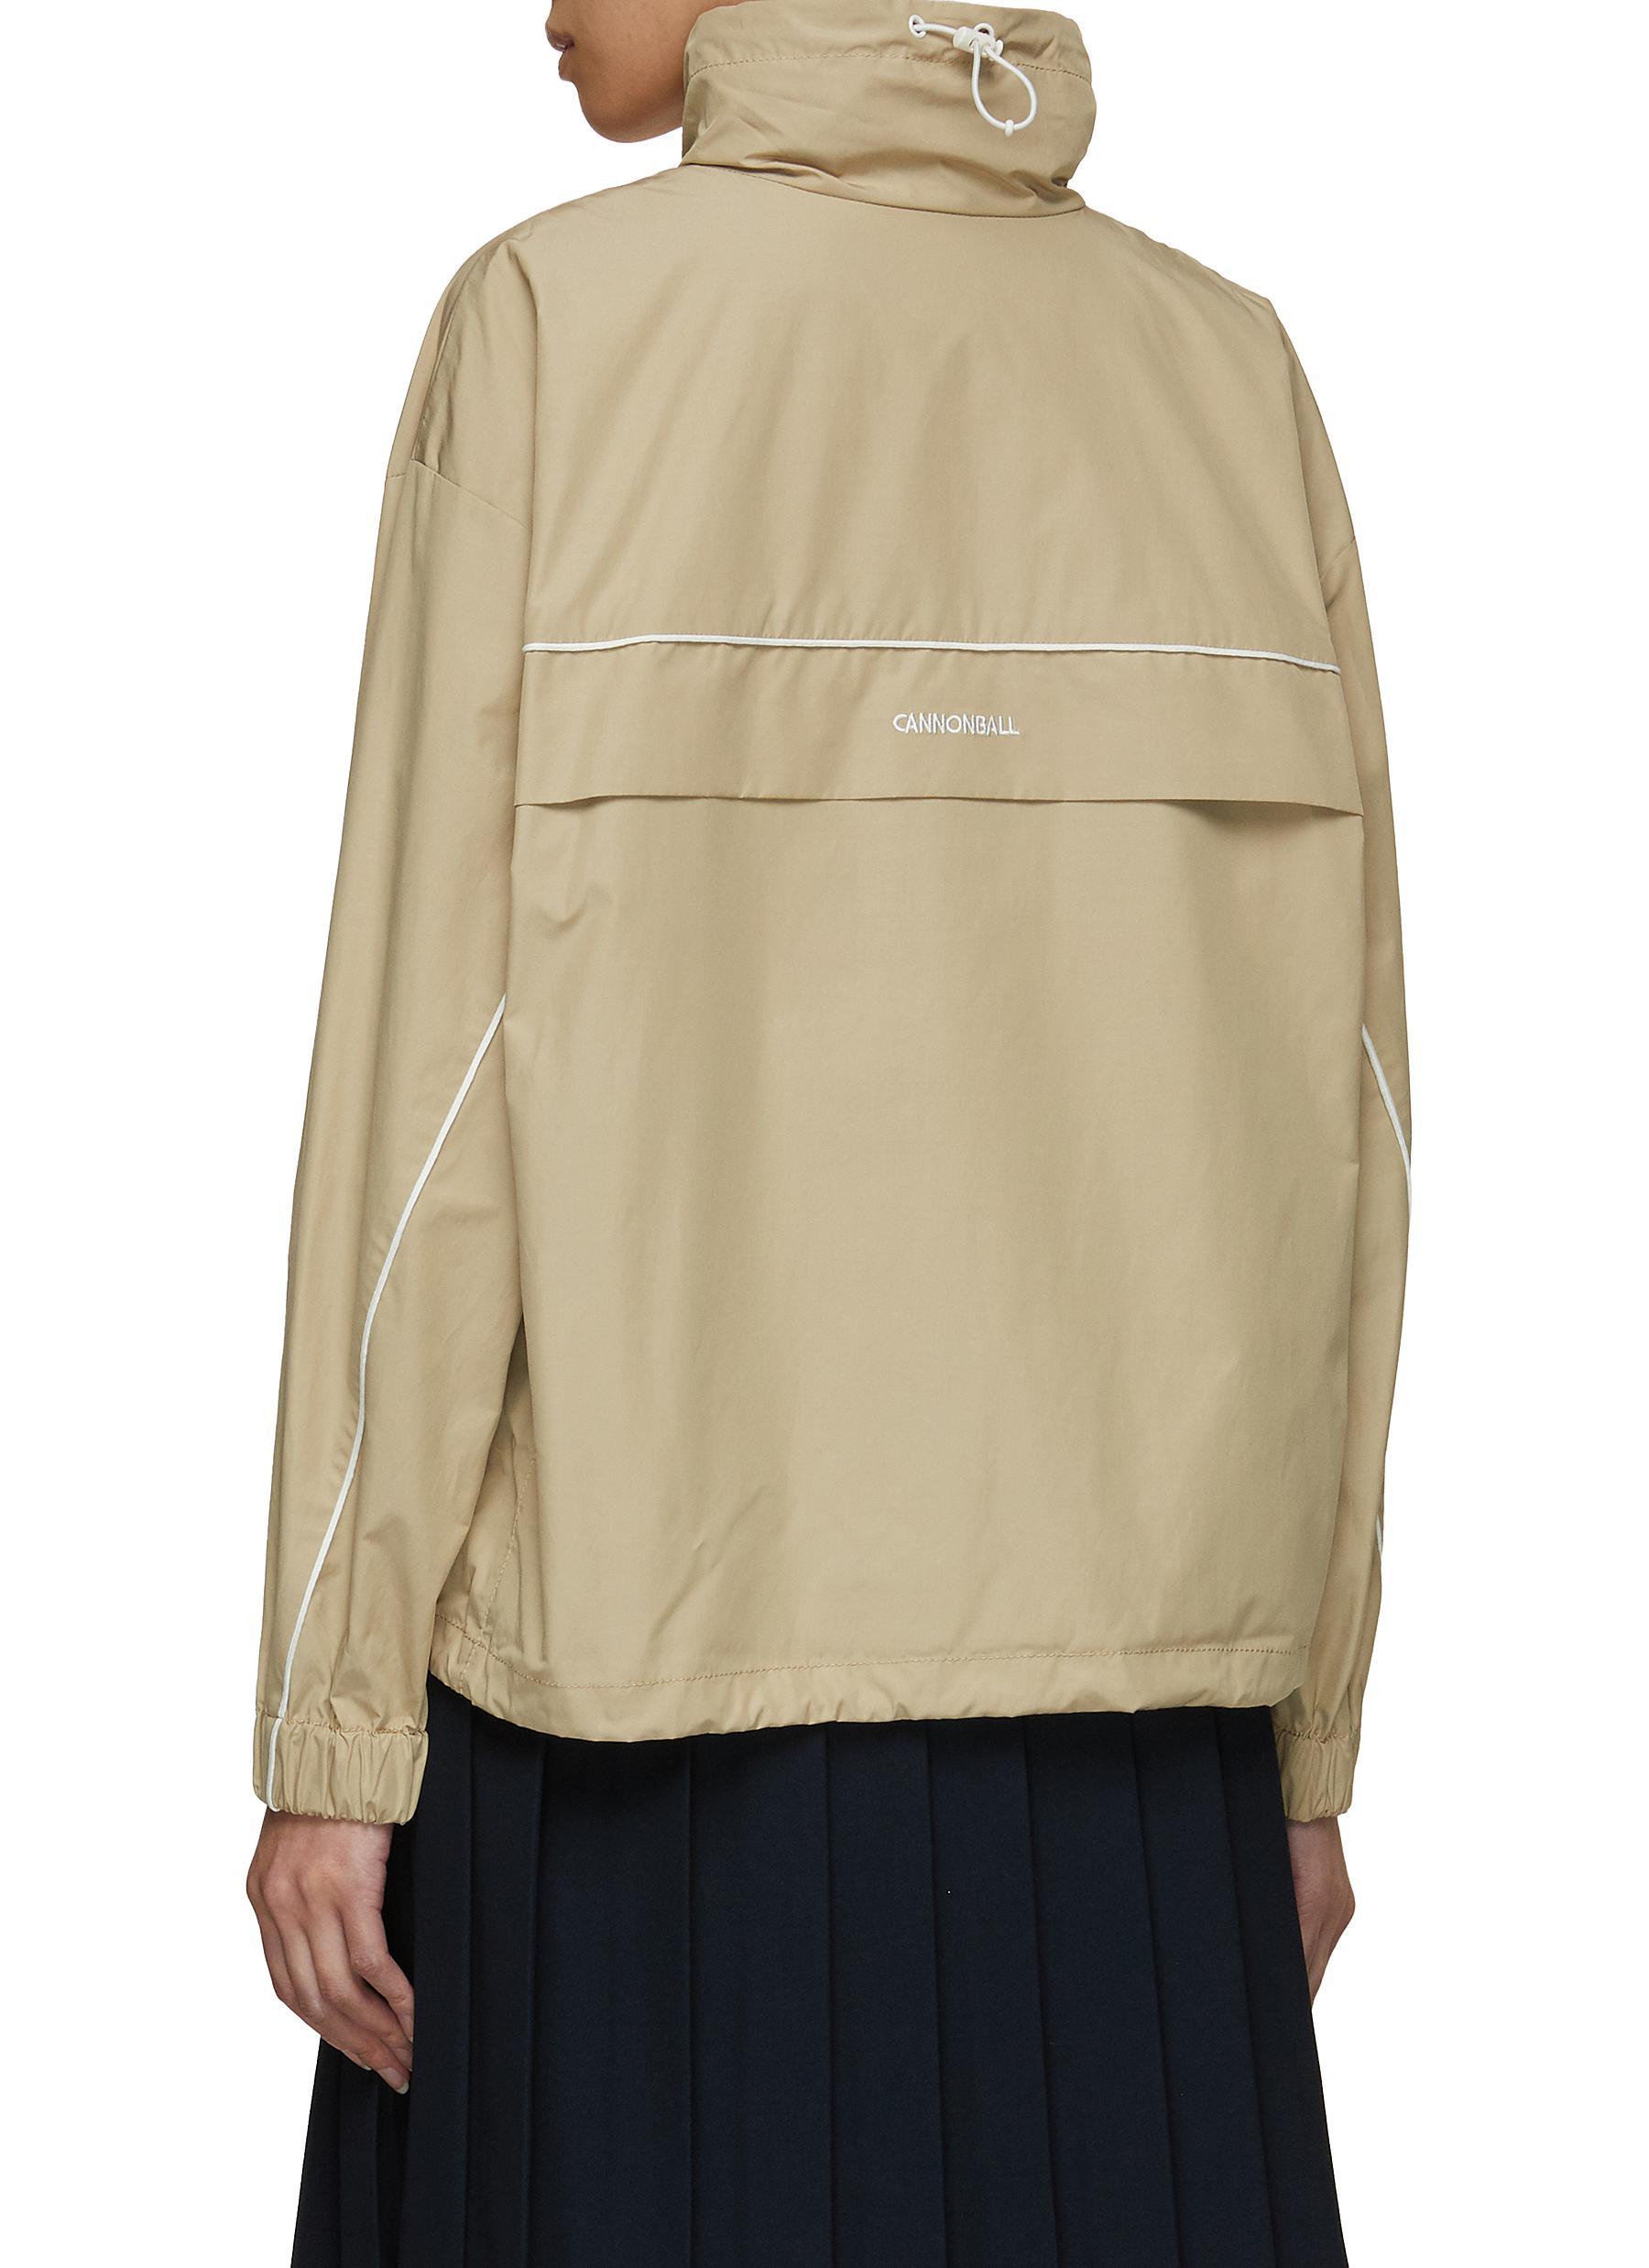 LUCKY MARCHE Le Match Cannonball Anorak Jacket in Natural | Lyst